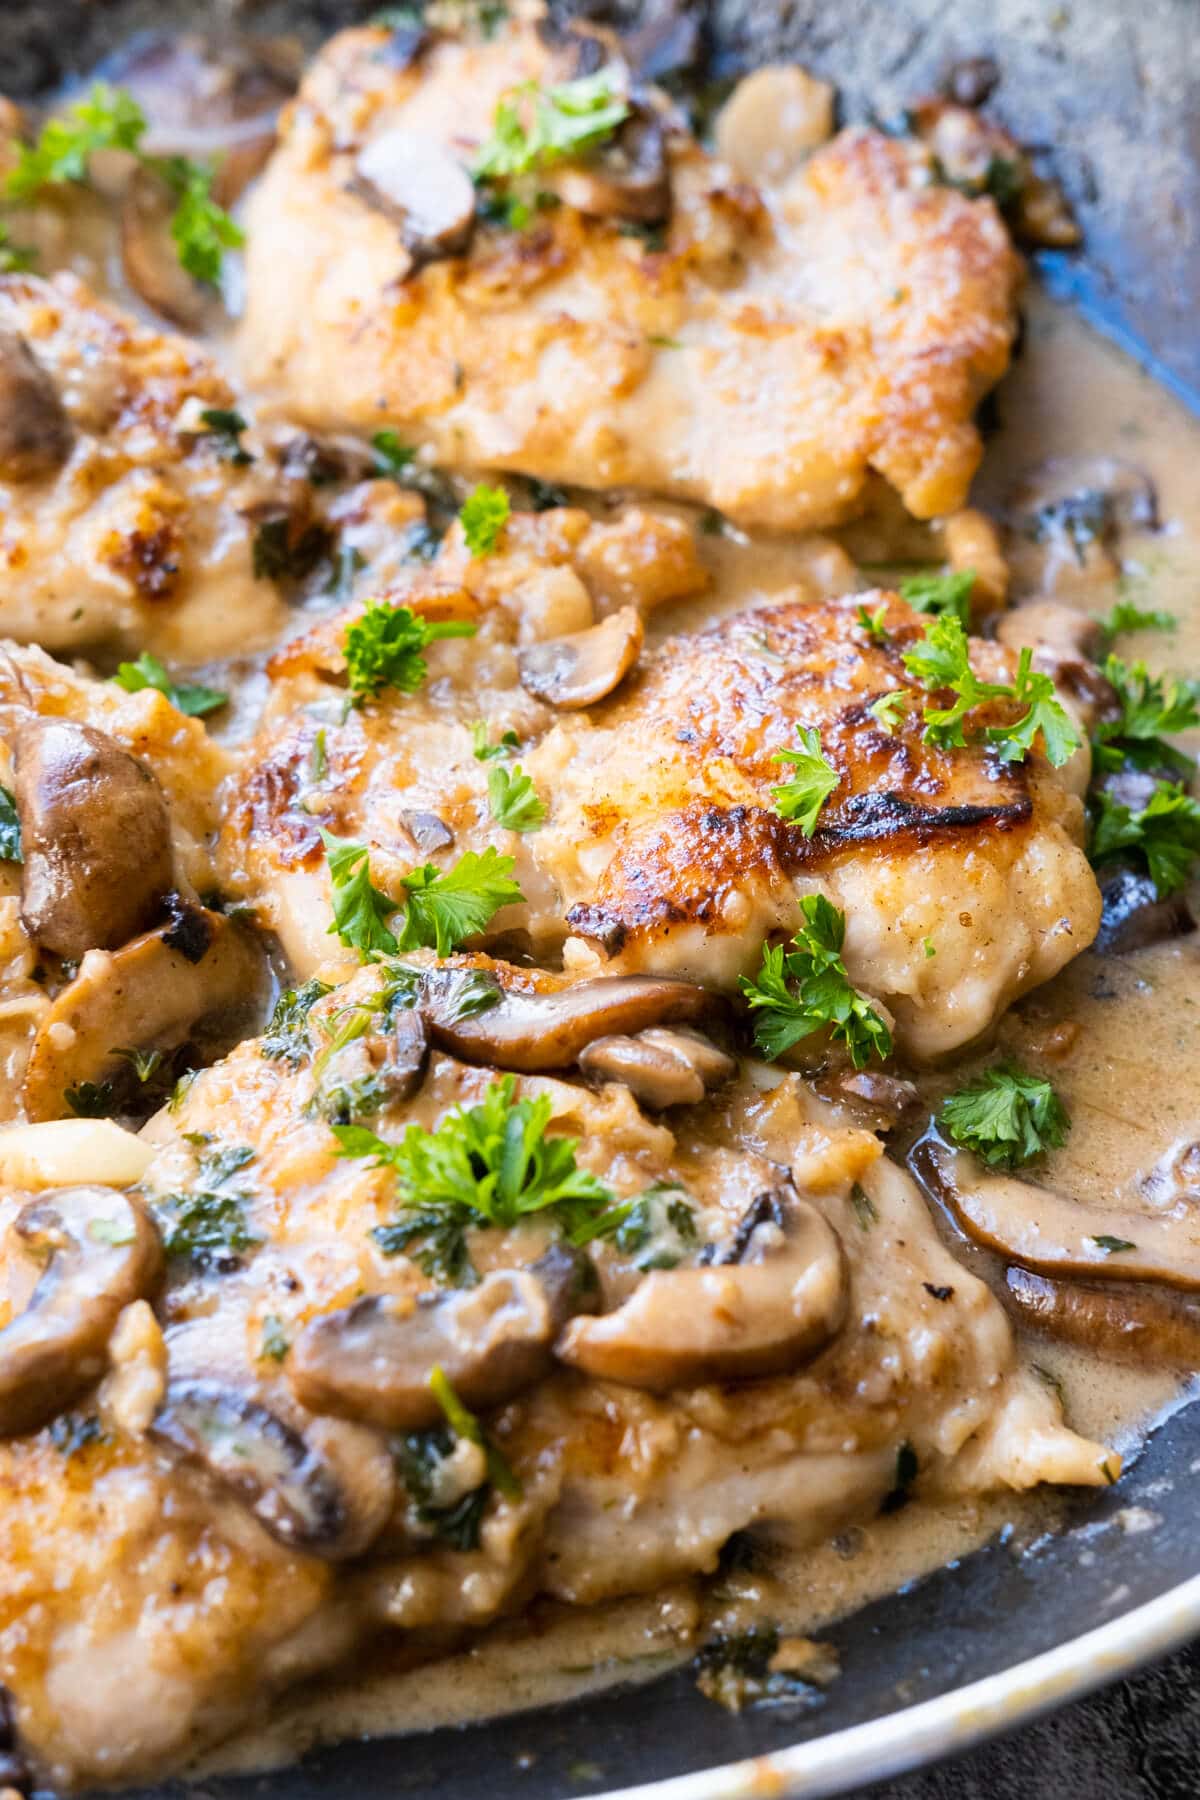 Appetizing chicken thigh pieces bathed in rich Marsala sauce beautifully presented in a black plate.